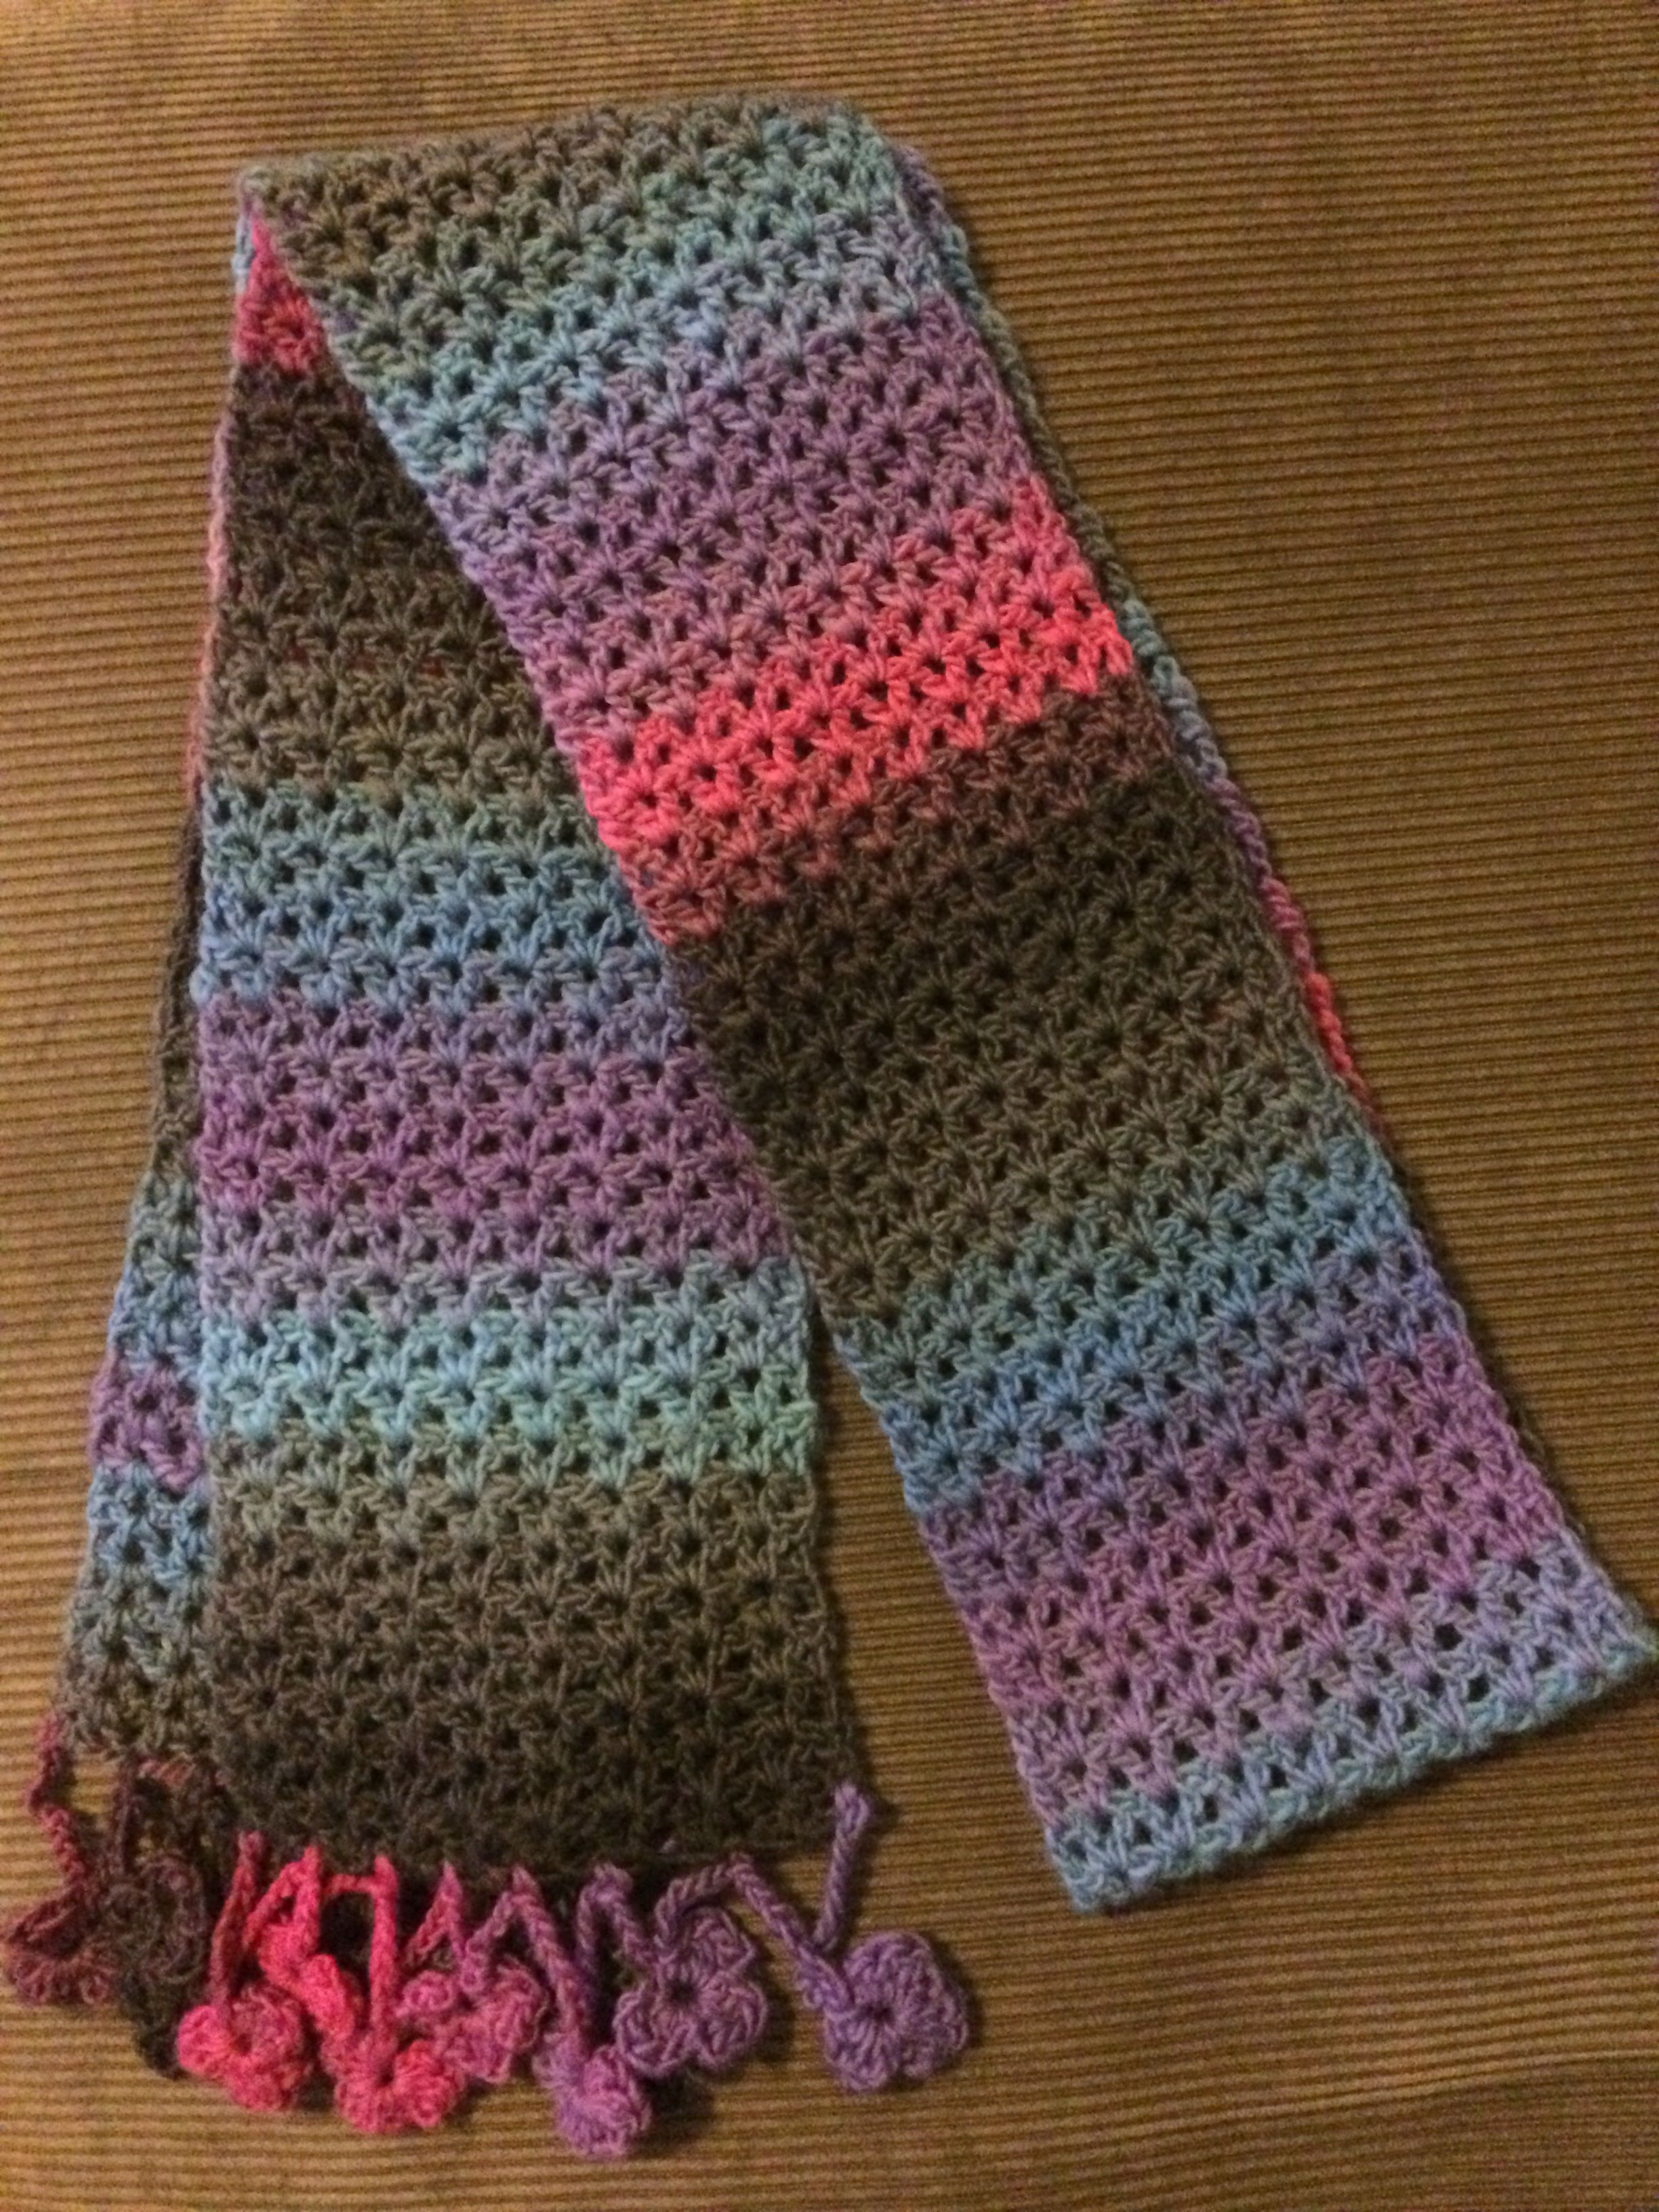 Crocheted Scarf Patterns Free Crochet Patterngelato Infinity Scarf Give Them The Hook